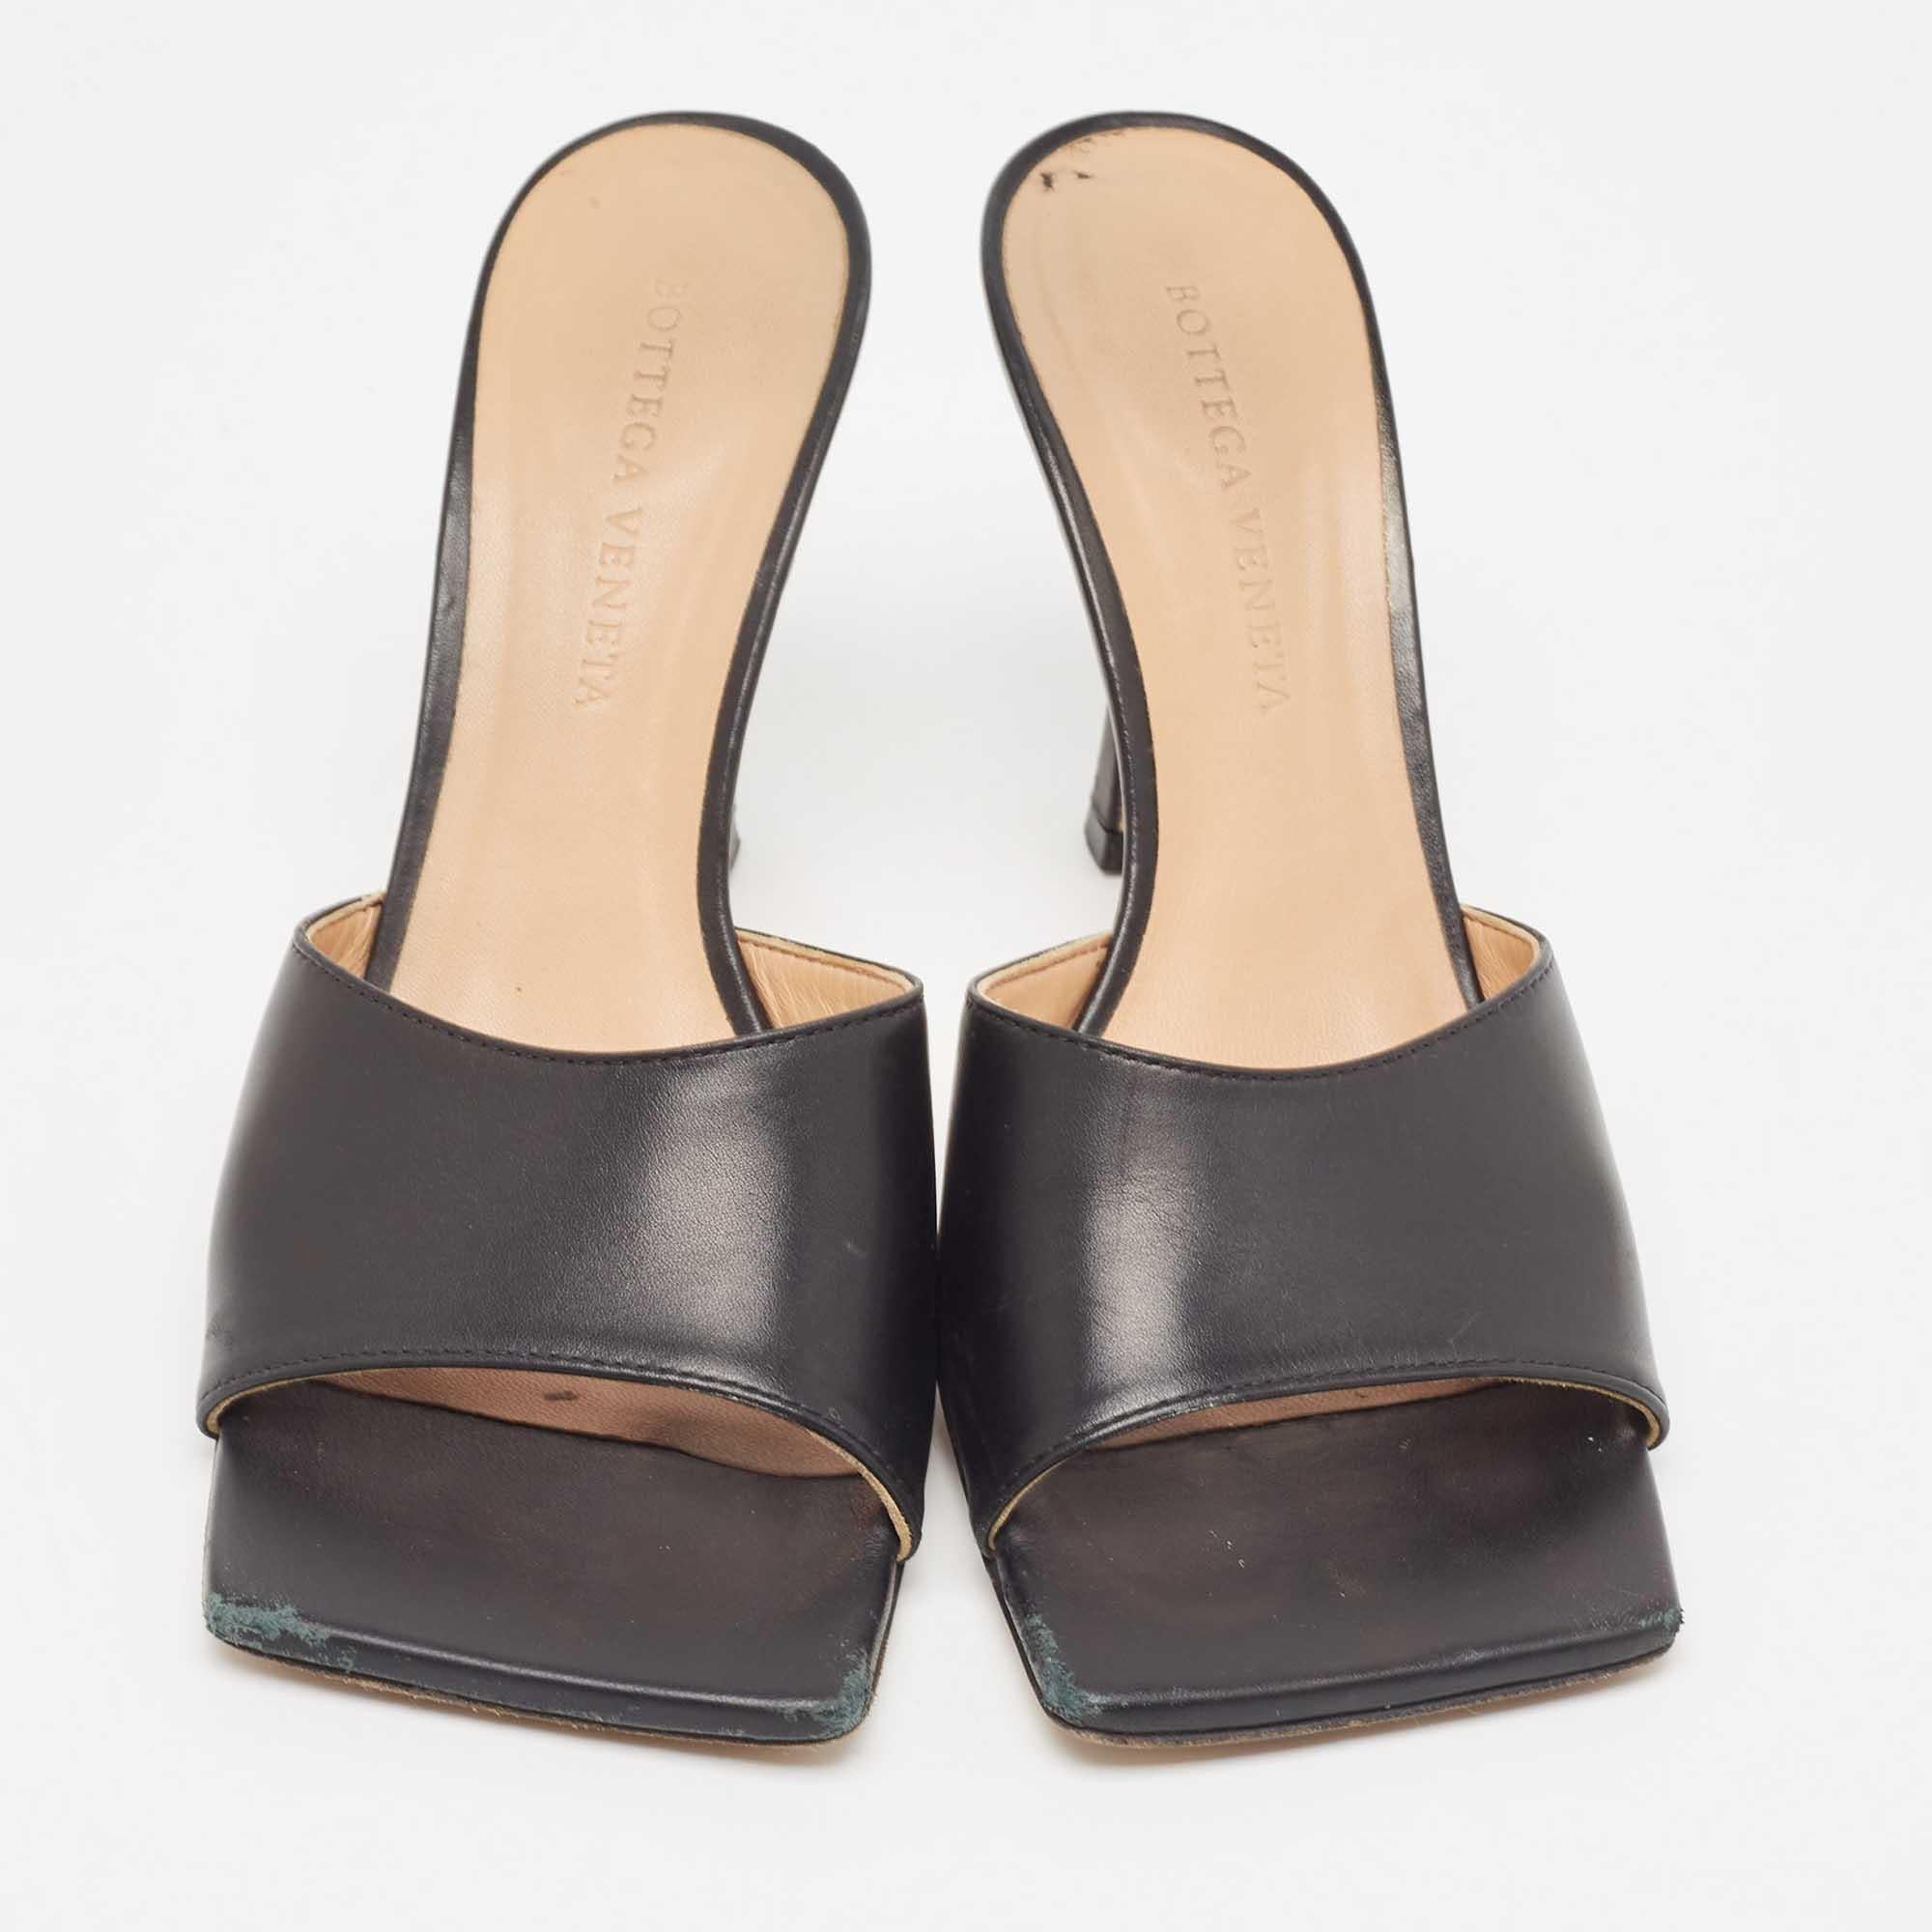 Lend an elegant finish to your look of the day with these Bottega Veneta black leather mules for women. They feature open toes and 9.5 m heels.

